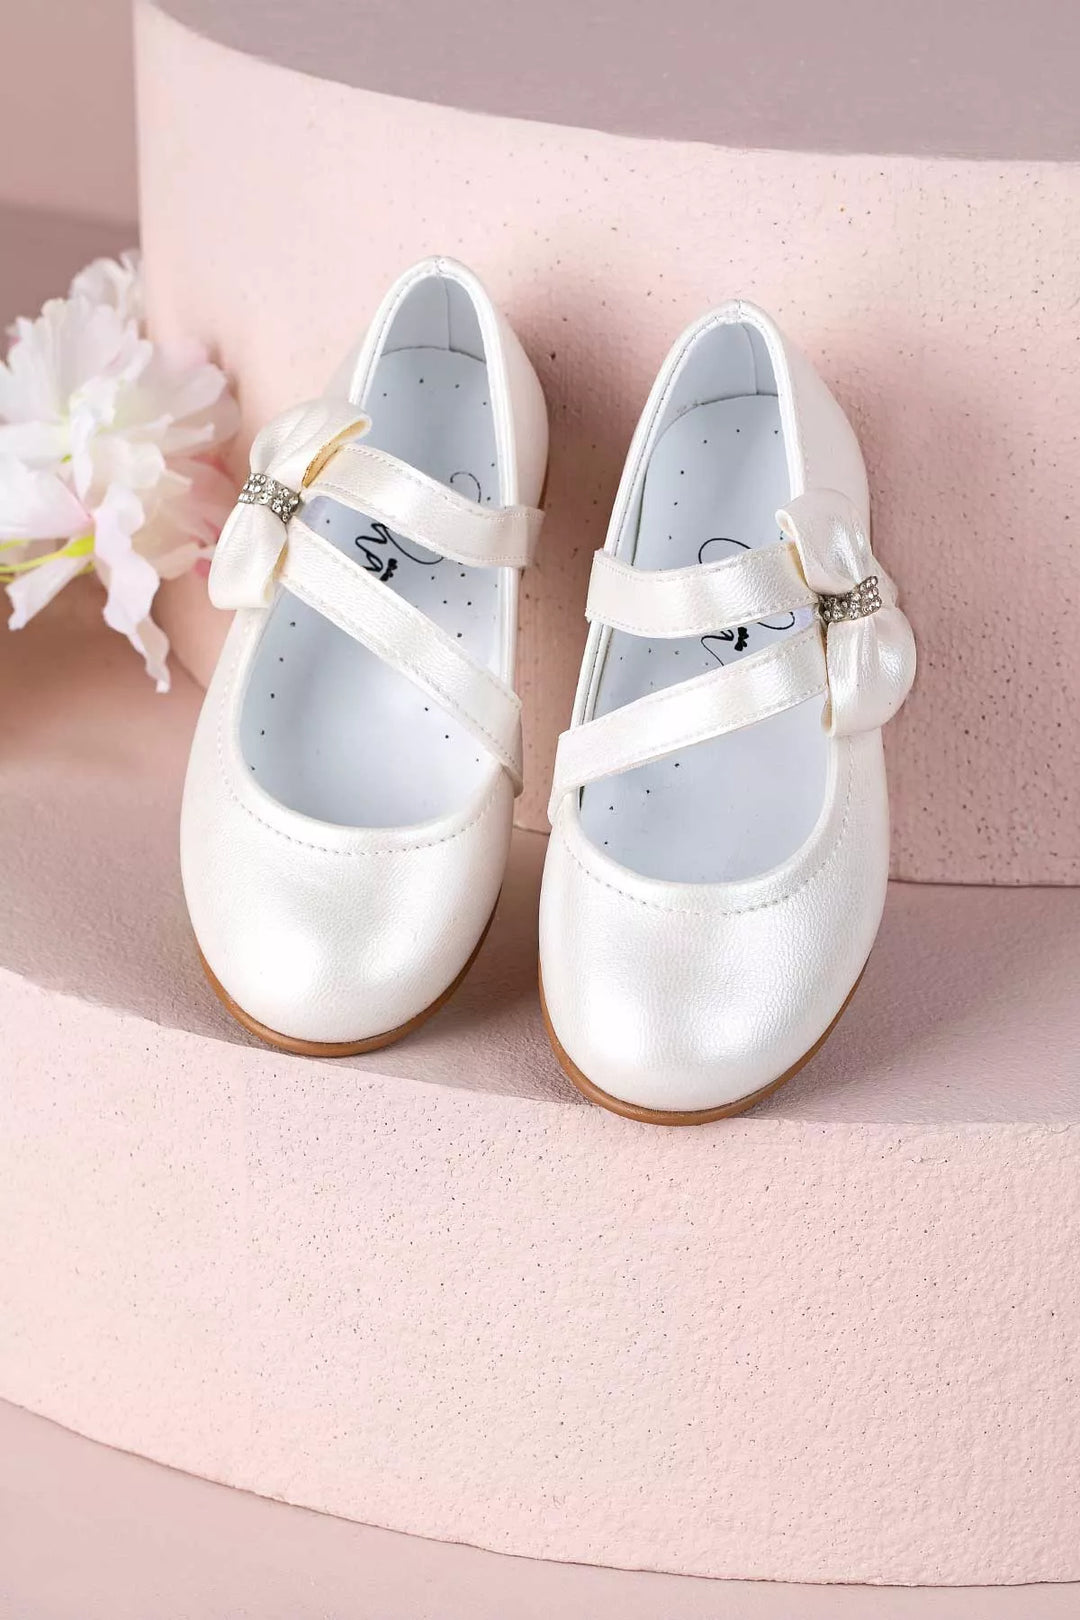 Ivory toddler shoes that have crystal stone ornaments and bow tie